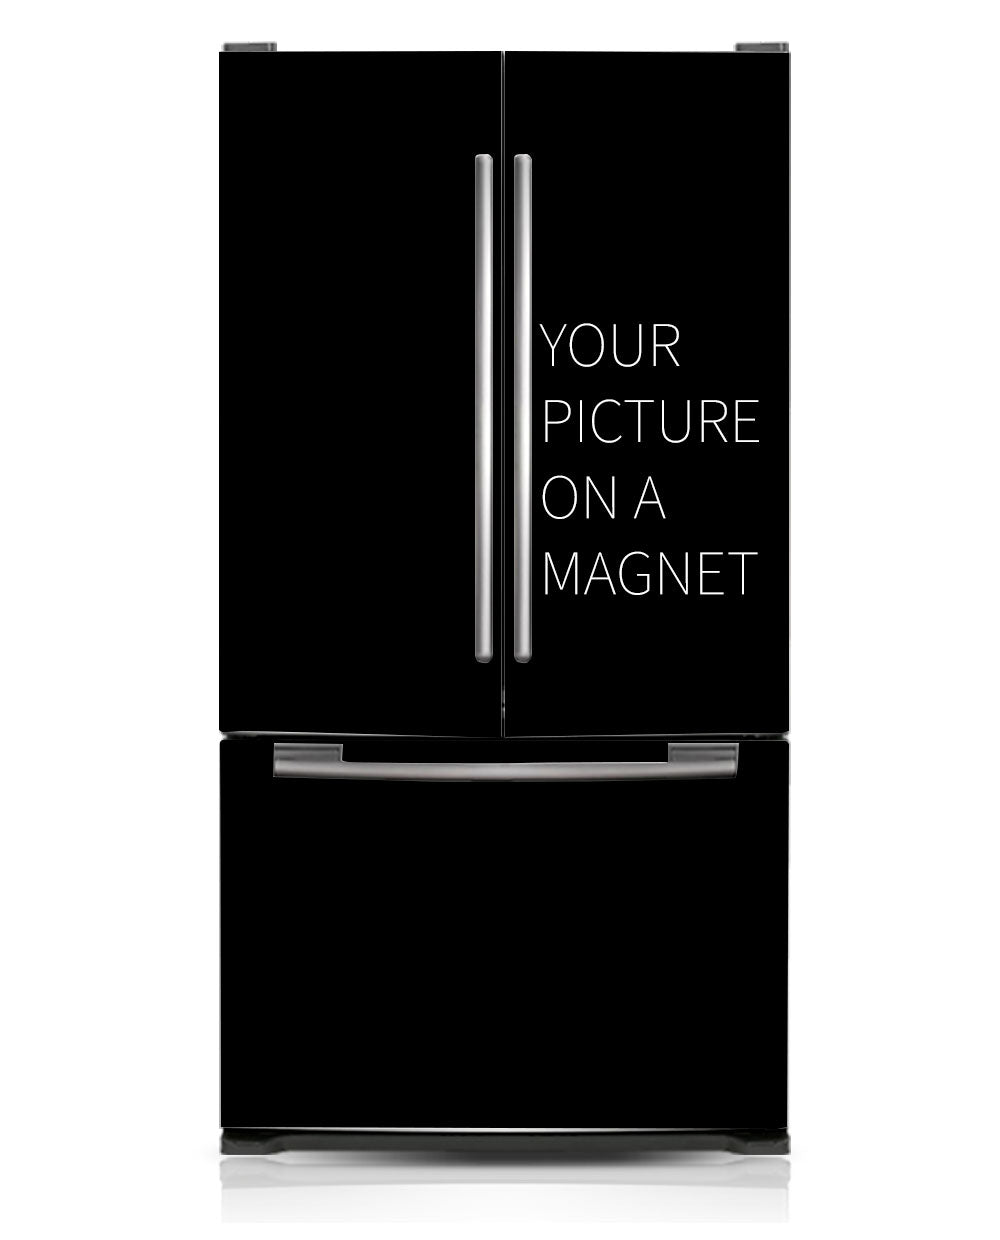 *Your design on a magnet